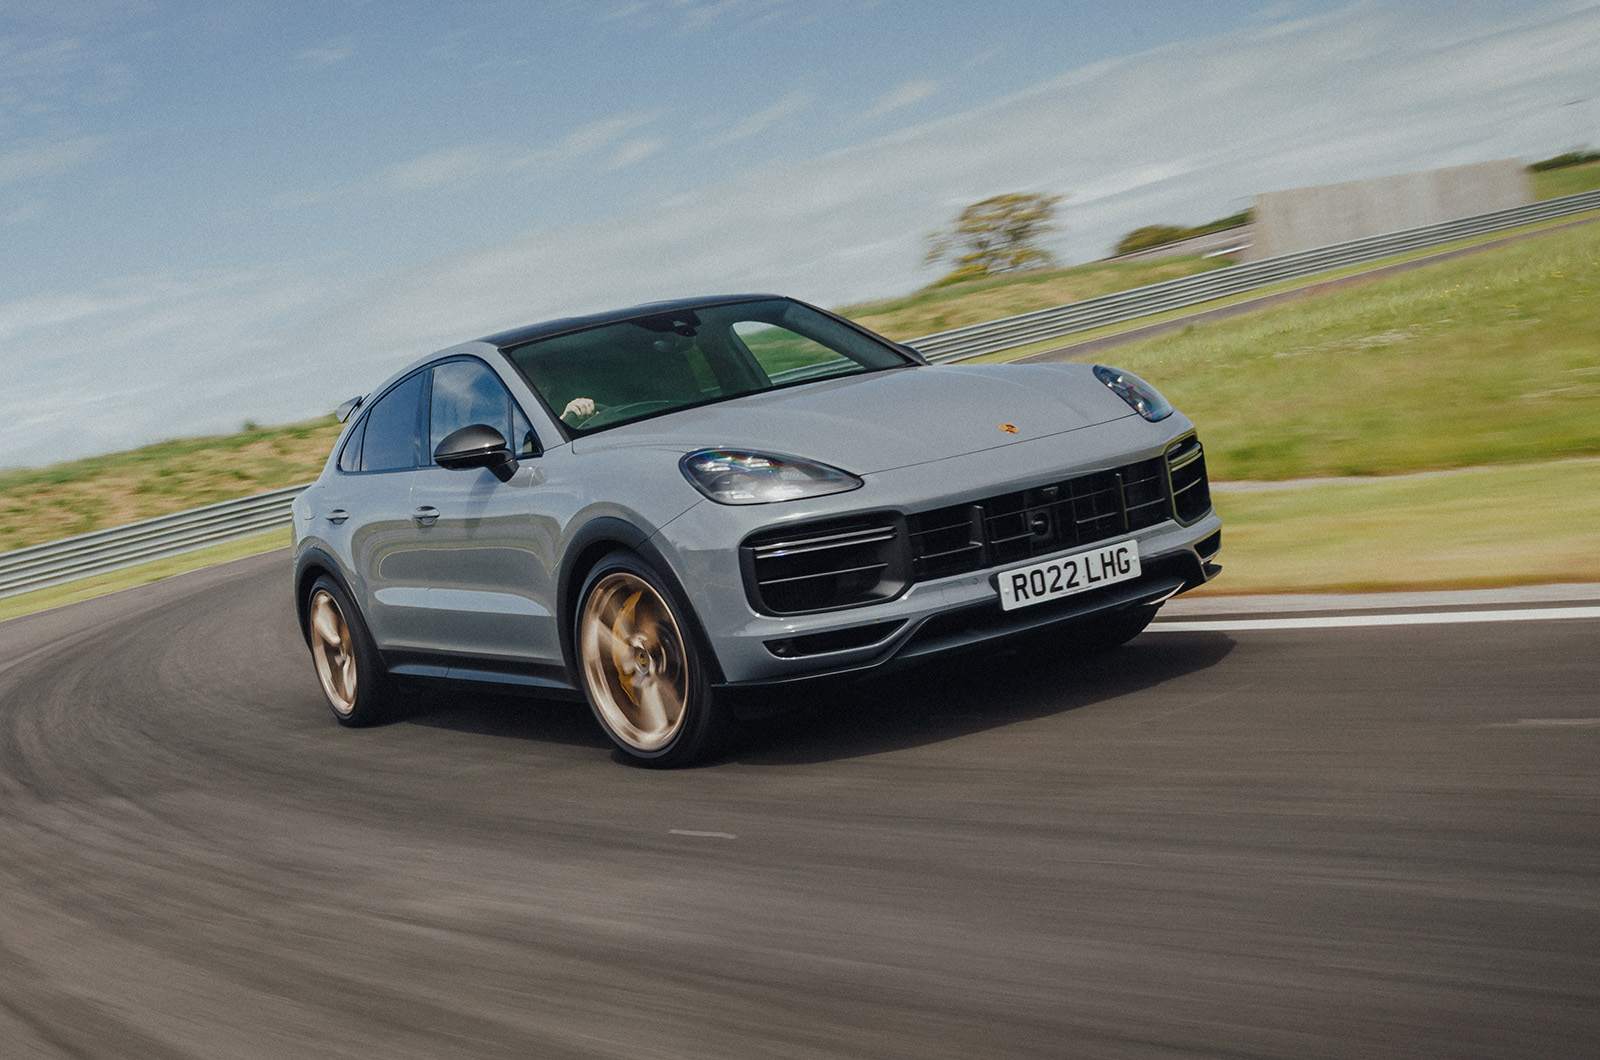 Used Porsche Cayenne Turbo GT 2021-2023 review